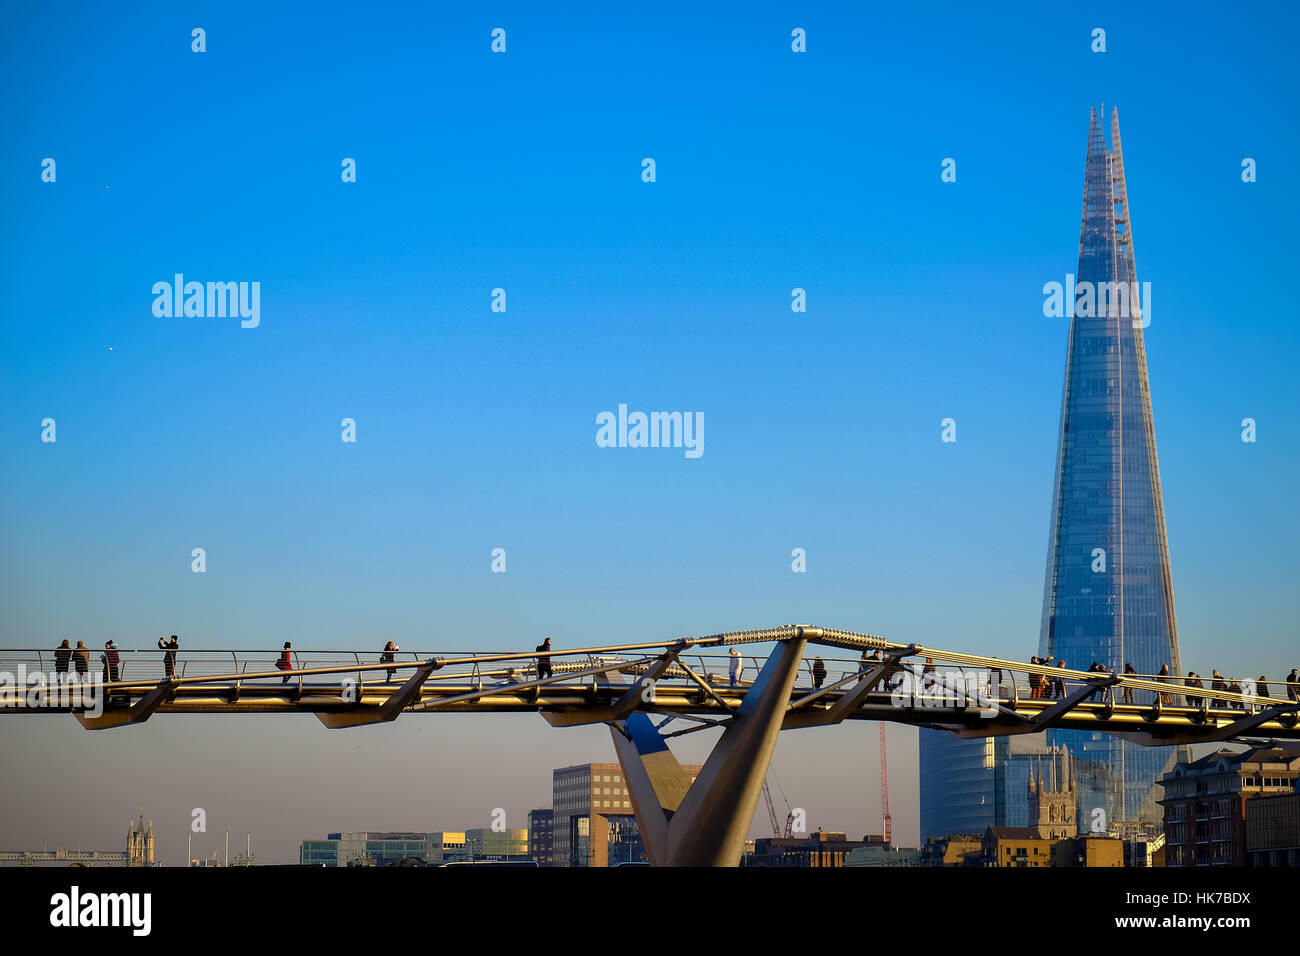 A crowd of people walk over London's Millennium Bridge, with The Shard office building in the background. Stock Photo